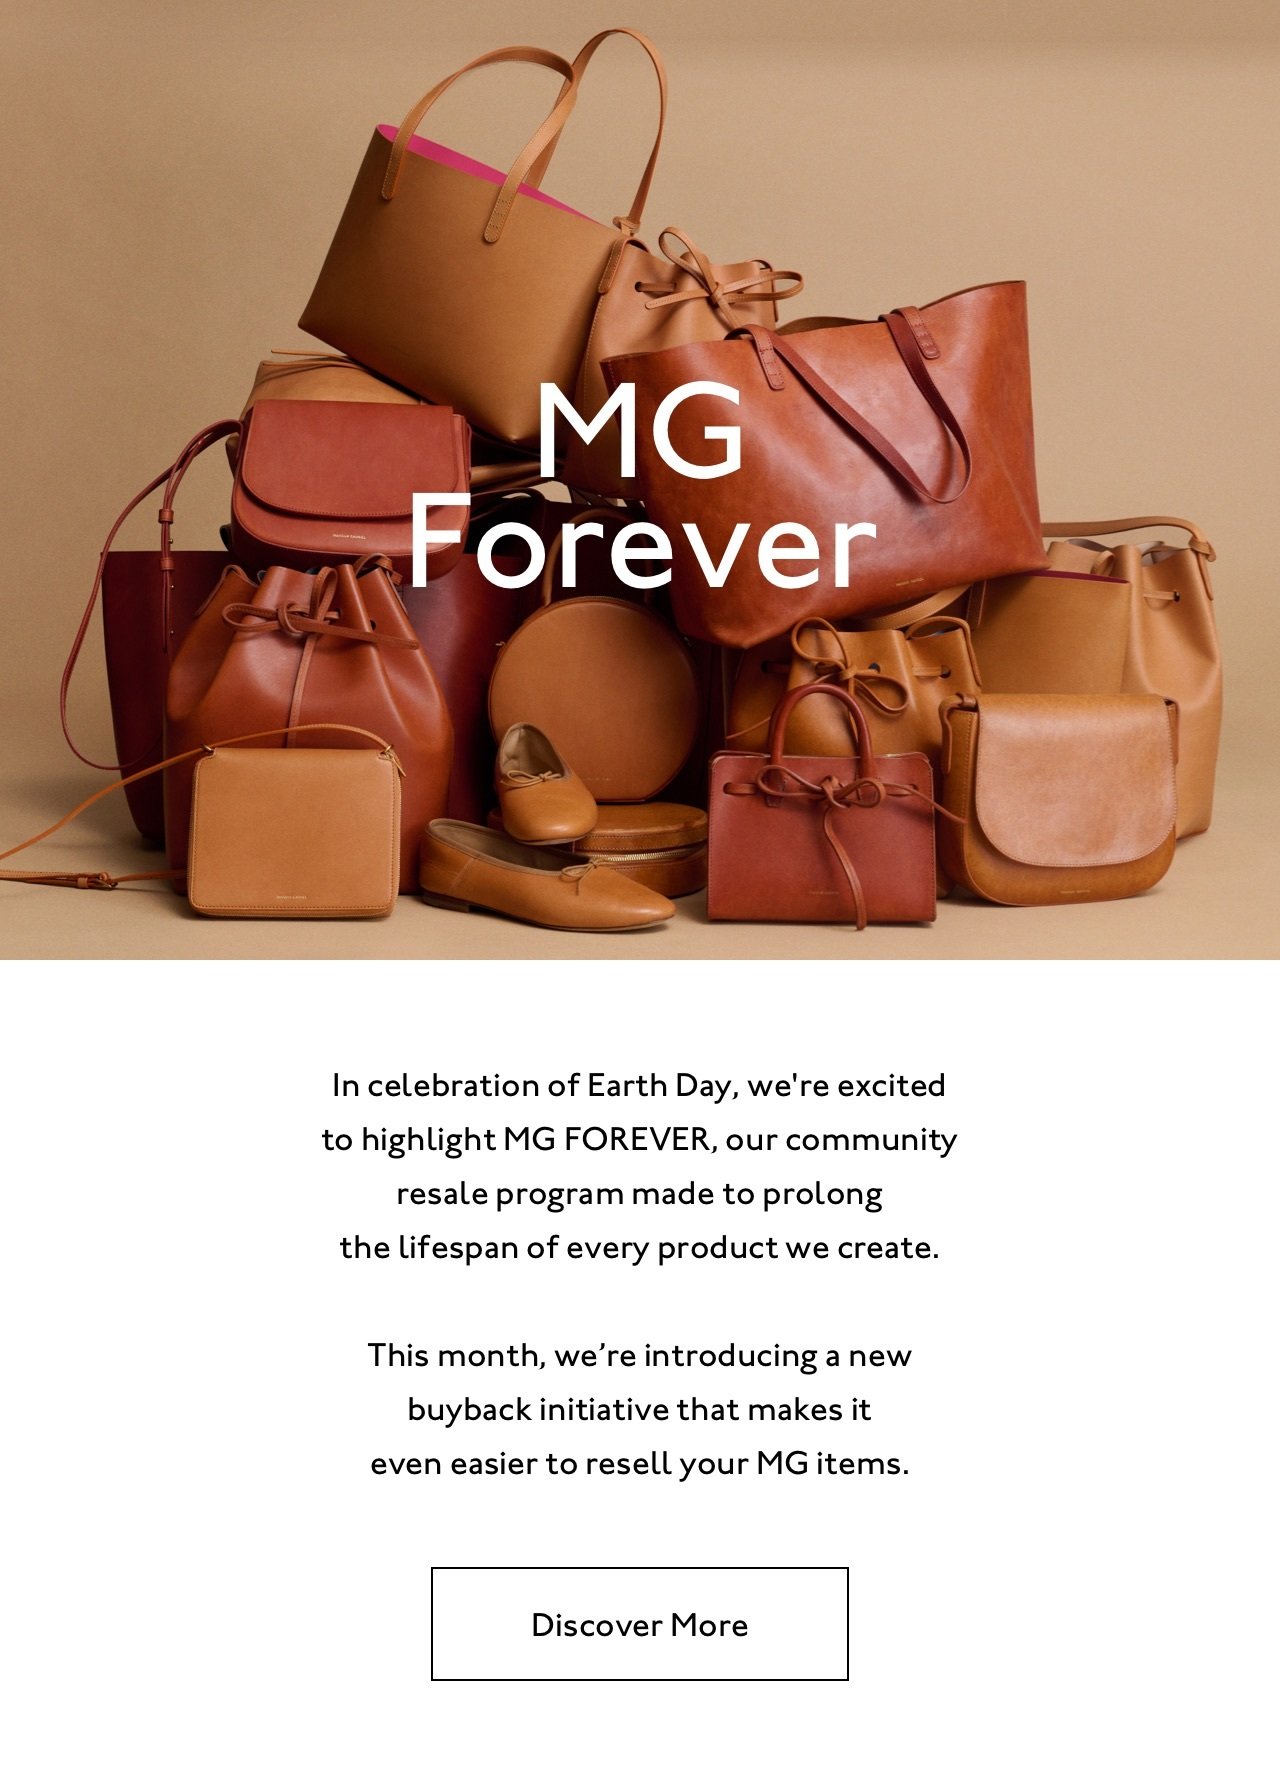 In celebration of Earth Day, we're excited to highlight MG Forever, our community resale program made to prolong the lifespan of every product we create.